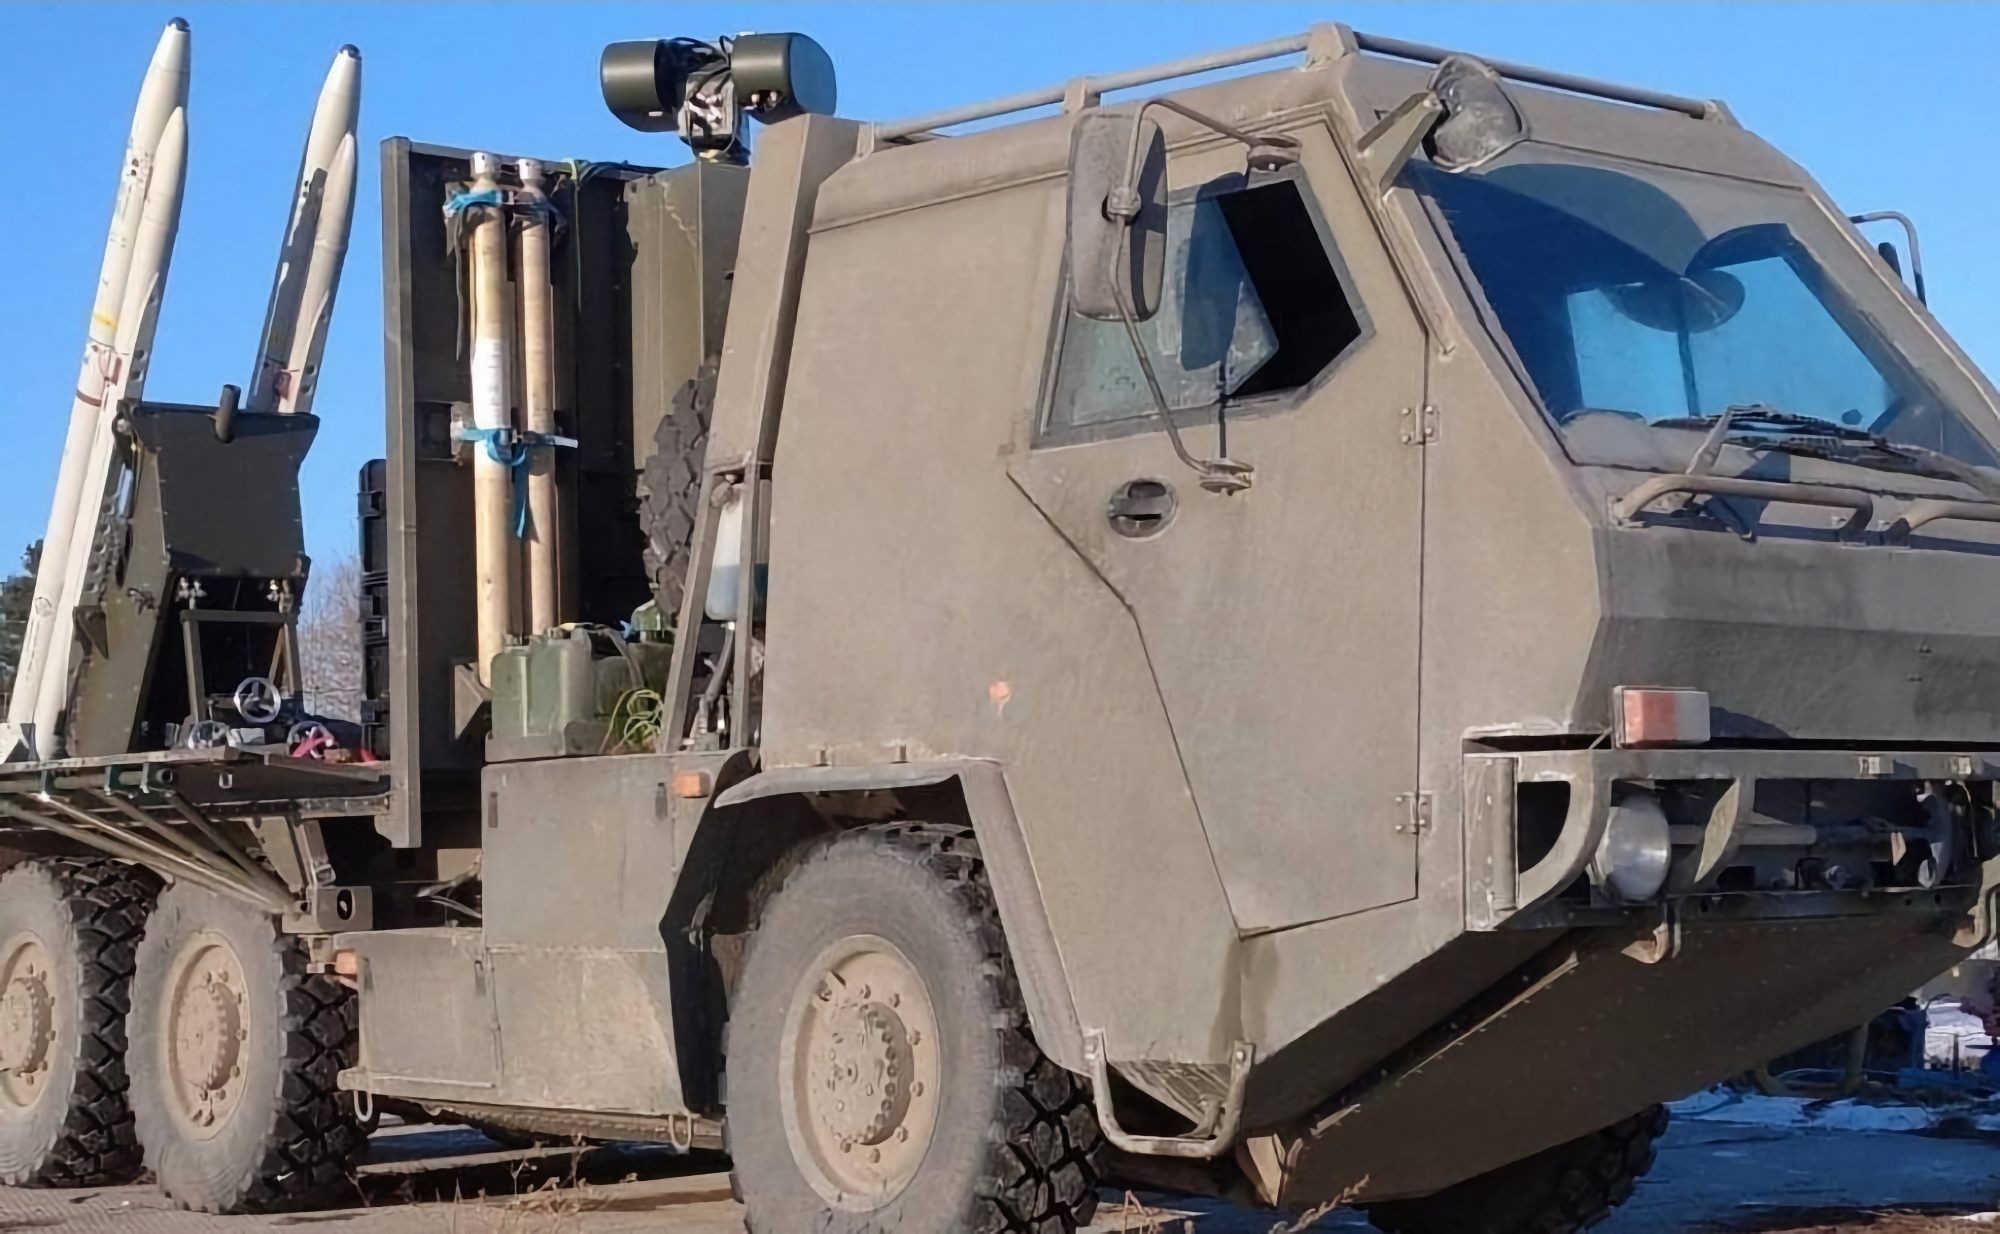 ASRAAM IR anti-aircraft missiles mounted on a Supacat HMT truck